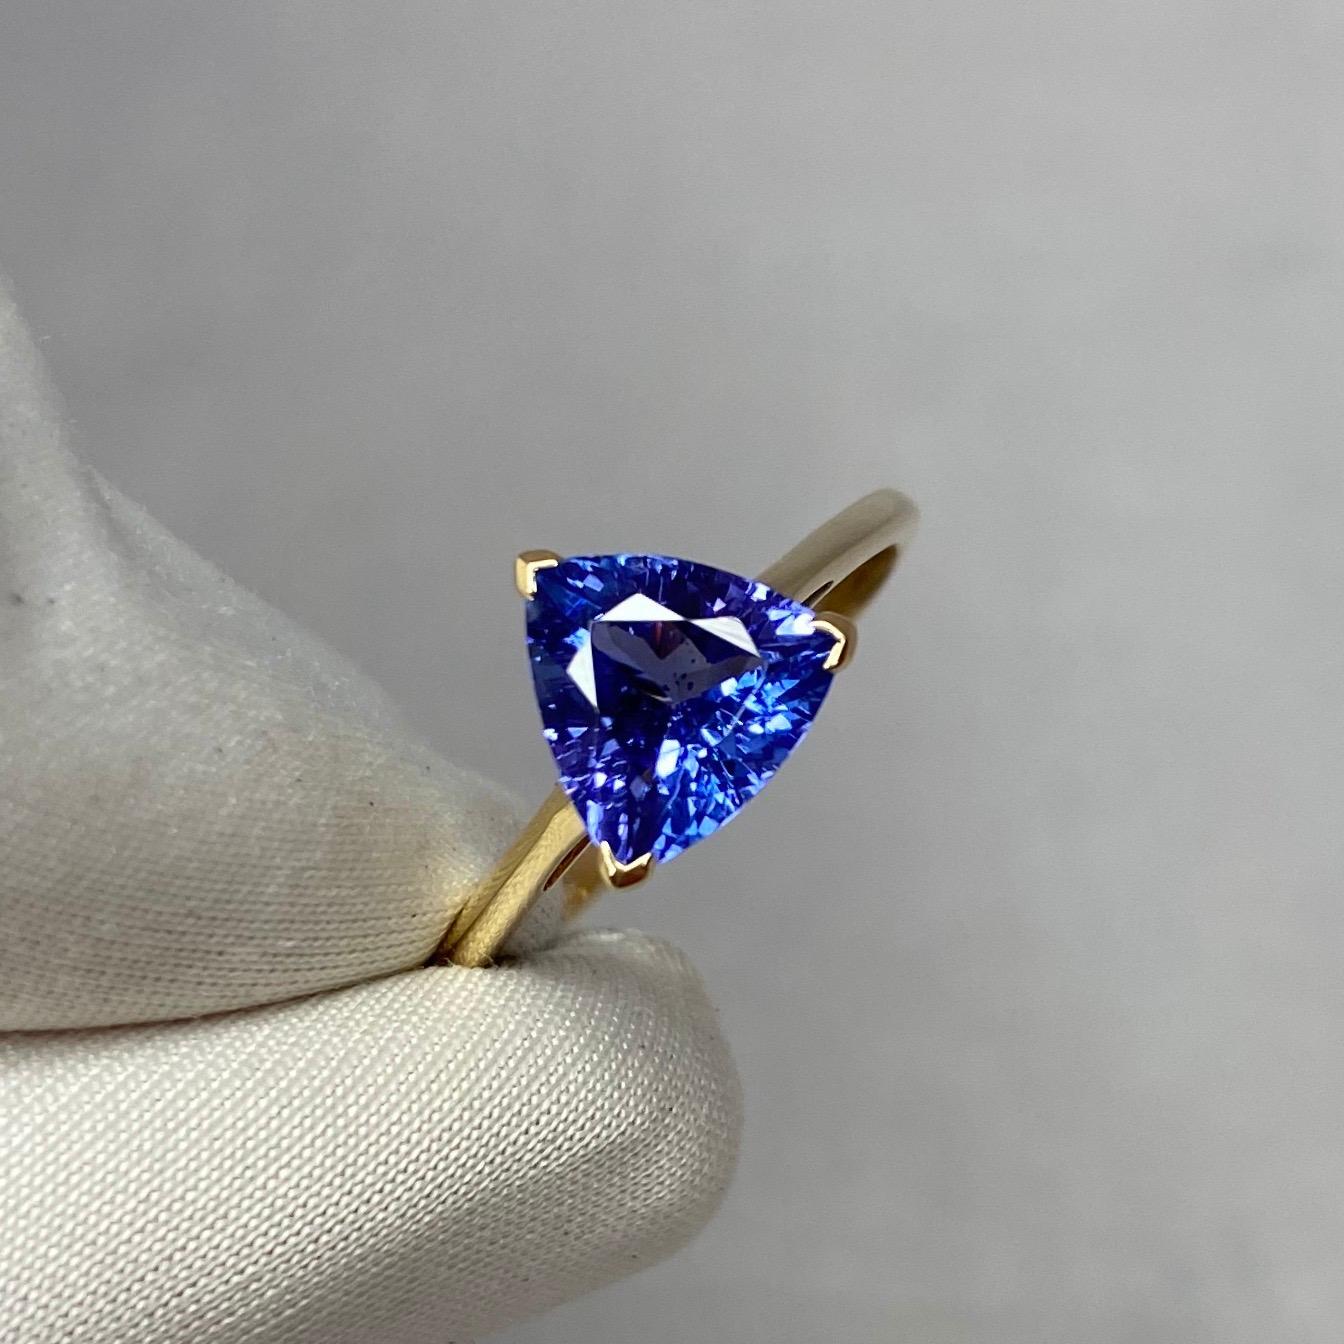 Vivid Blue Violet Tanzanite Yellow Gold Solitaire Ring

1.70 Carat tanzanite with a stunning vivid violet blue colour and very good clarity. A very clean stone with only some small natural inclusions visible when looking closely. Set in a fine 14k